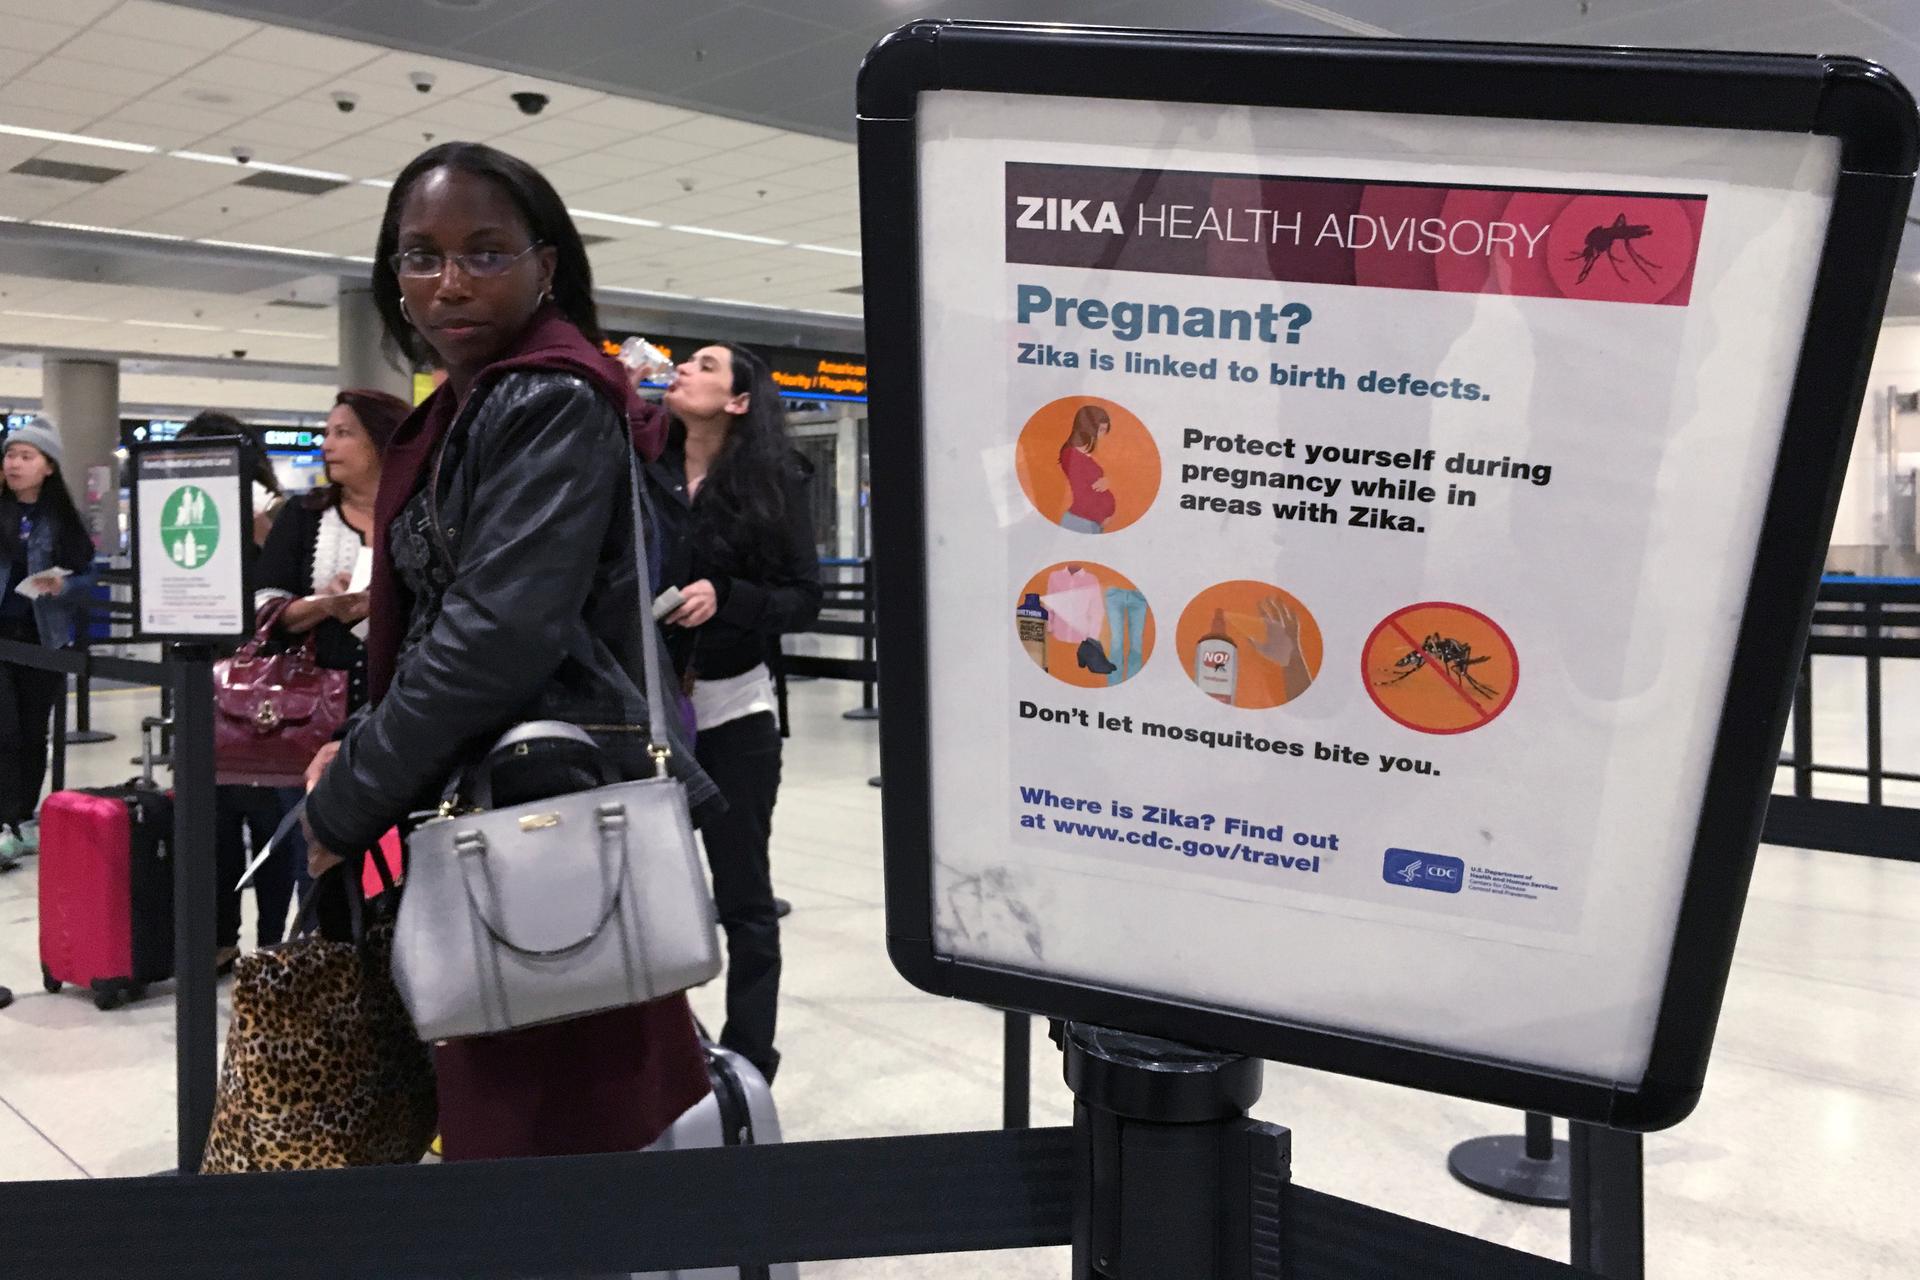 A woman looks at a Center for Disease Control (CDC) health advisory sign about the dangers of the Zika virus as she lines up for a security screening at Miami International Airport in Miami, Florida, U.S., May 23, 2016. 